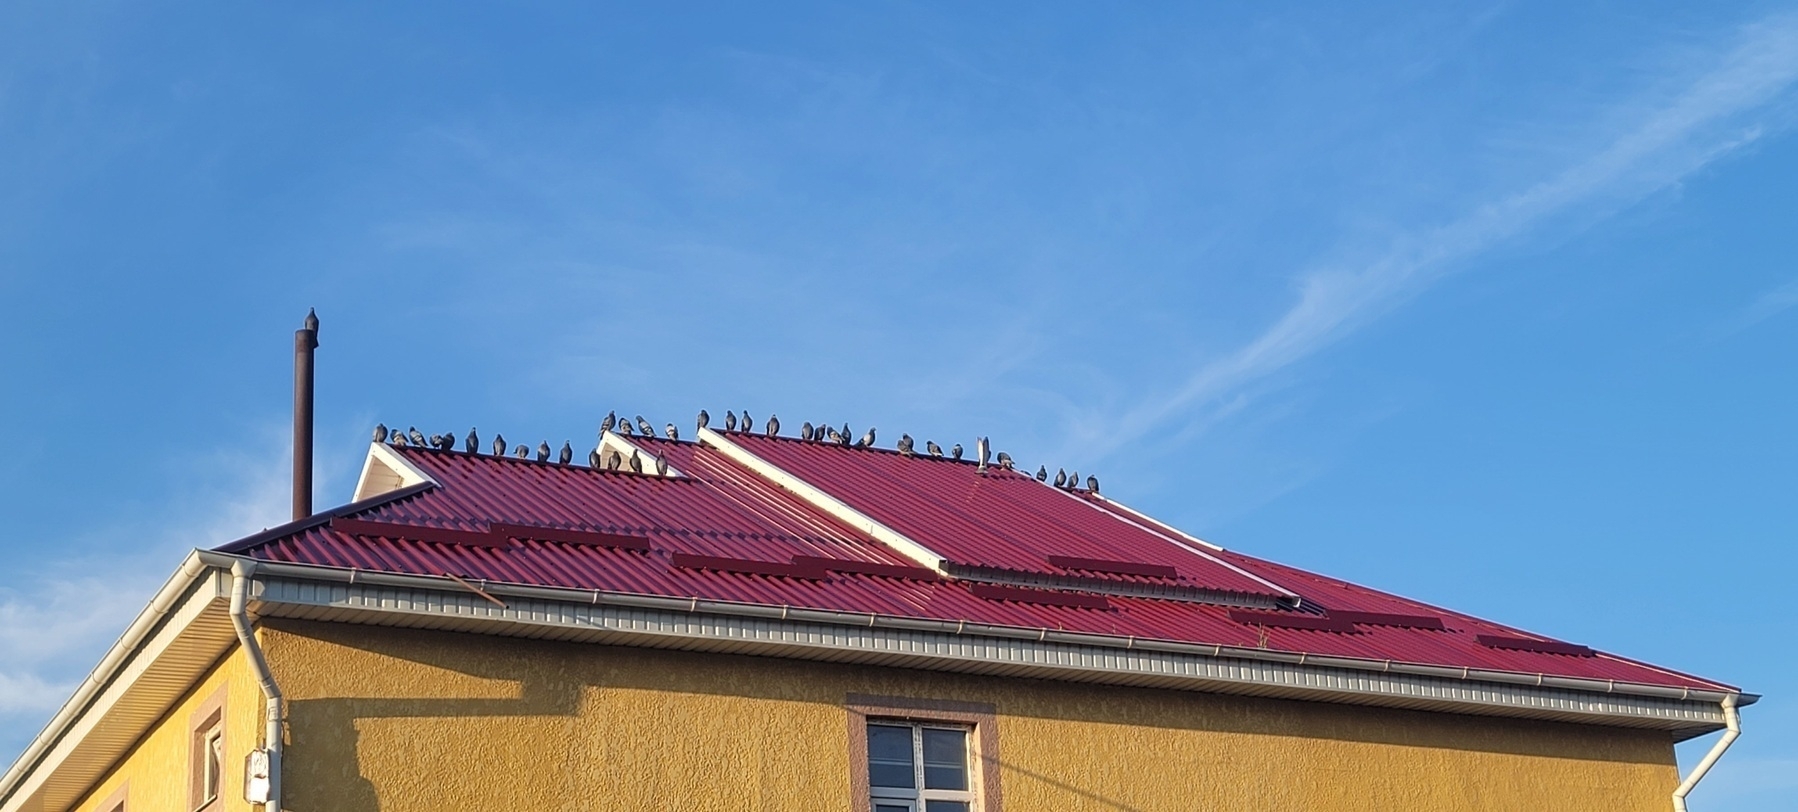 top part of a yellow house and red roof with about 35 pigeons on it against a blue sky